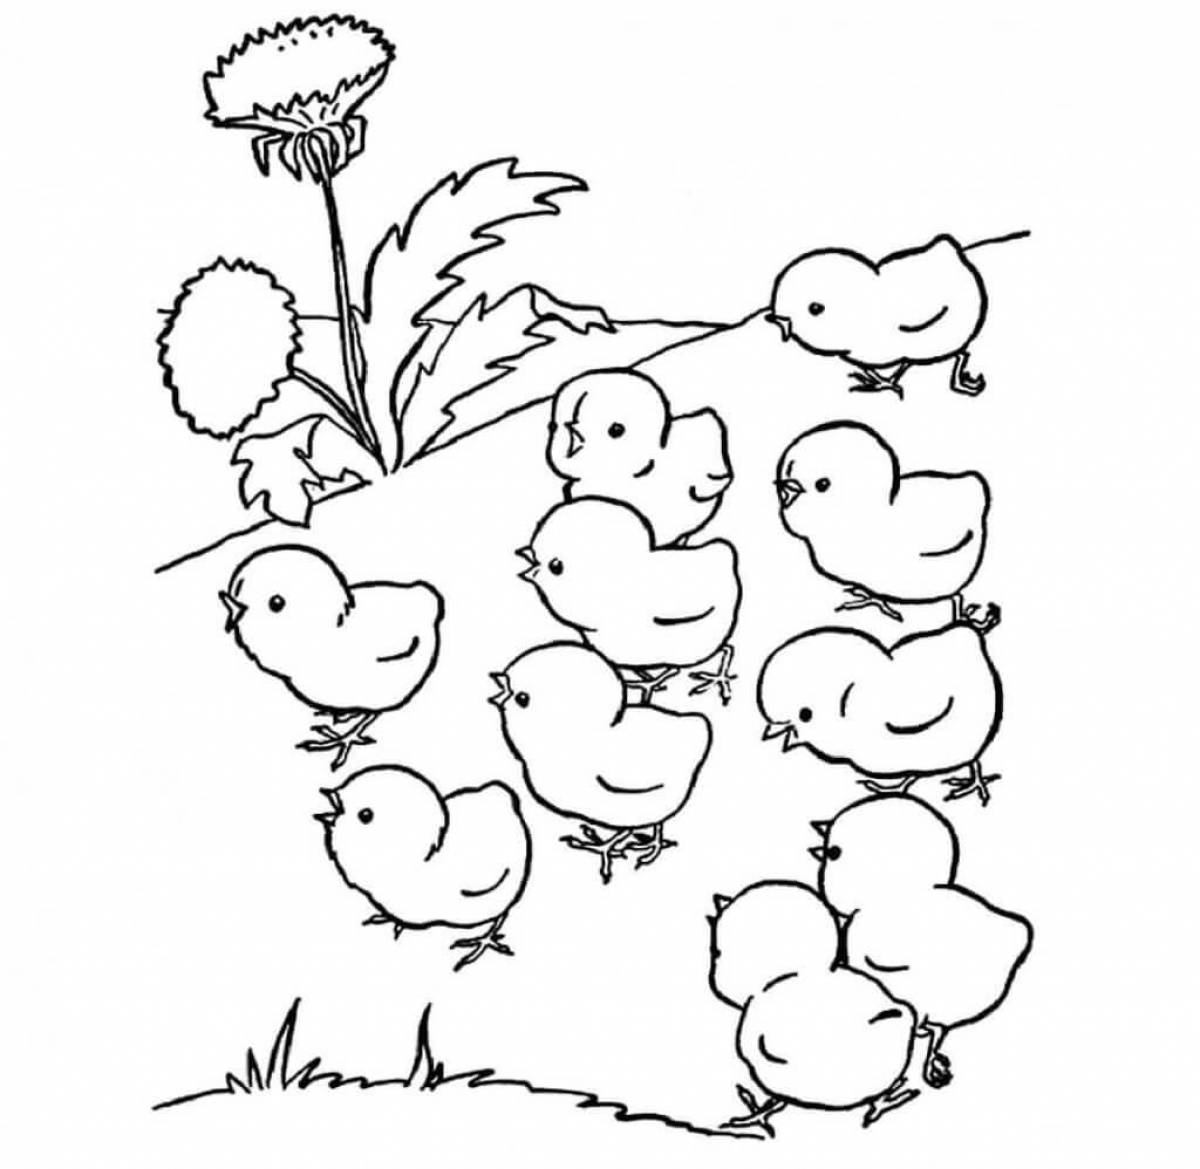 Cute chick coloring book for 2-3 year olds